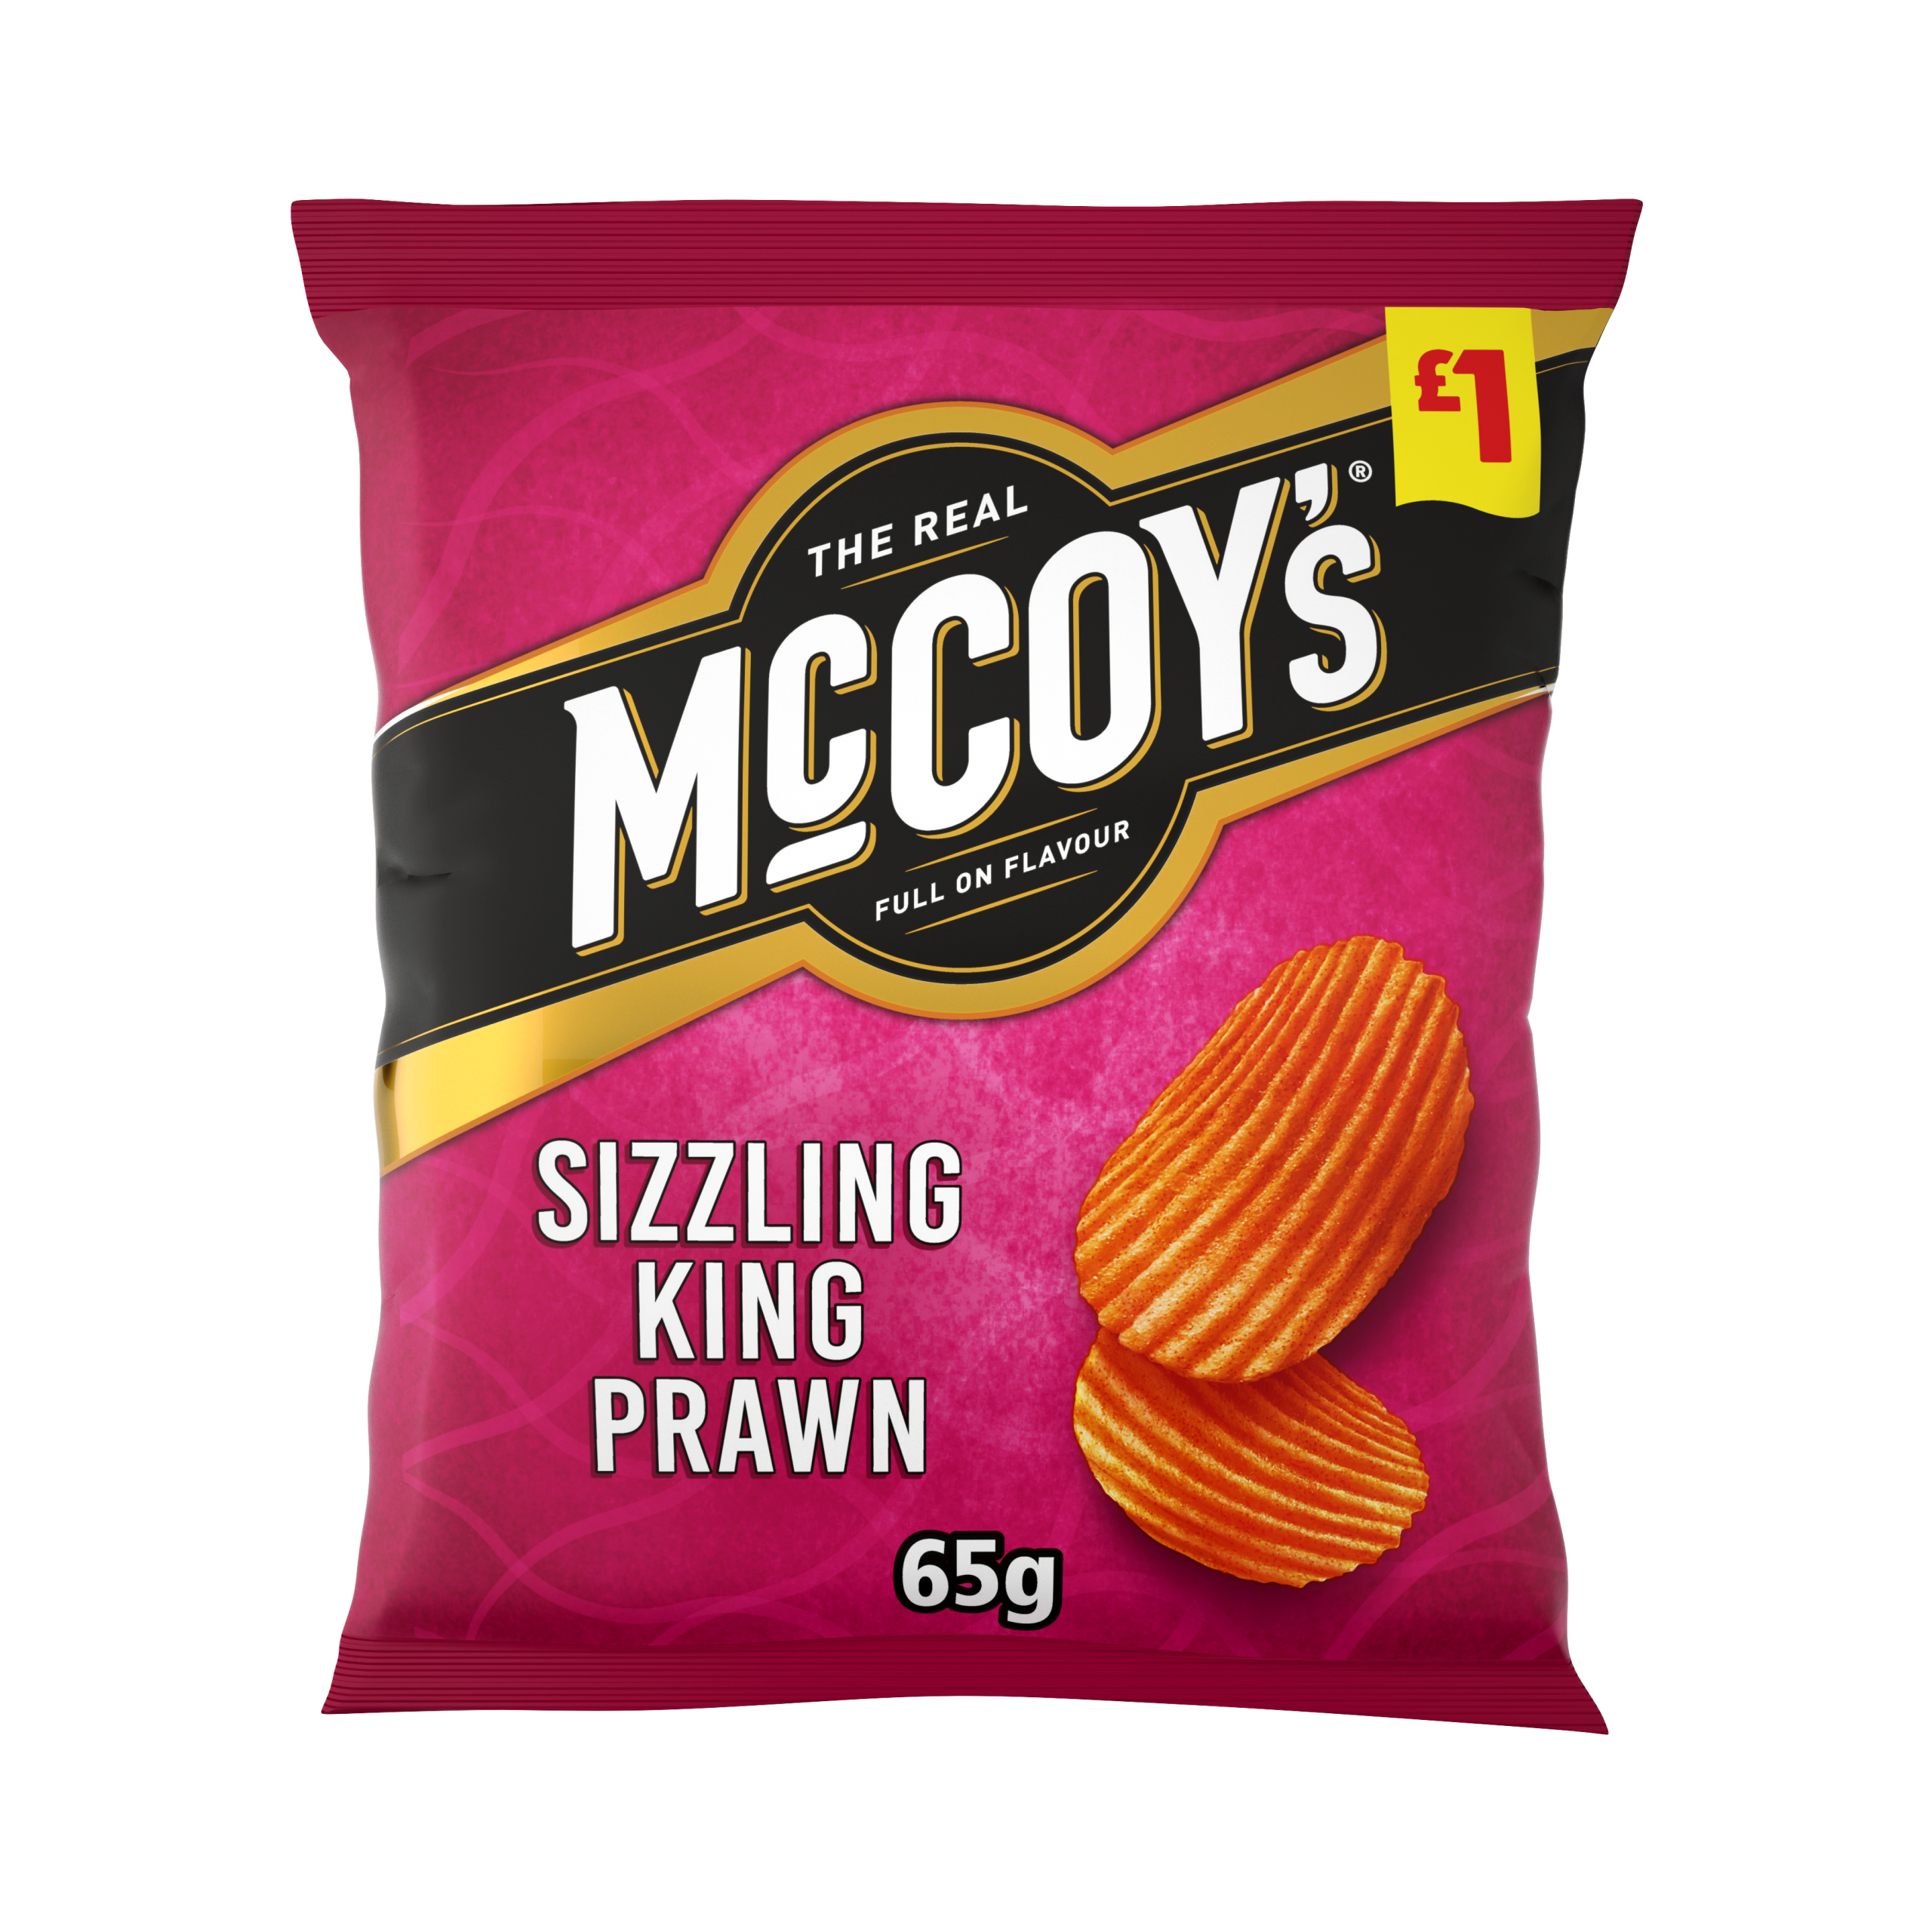 KP Snacks launches £1 PMP SKU with McCoy’s Sizzling King Prawn